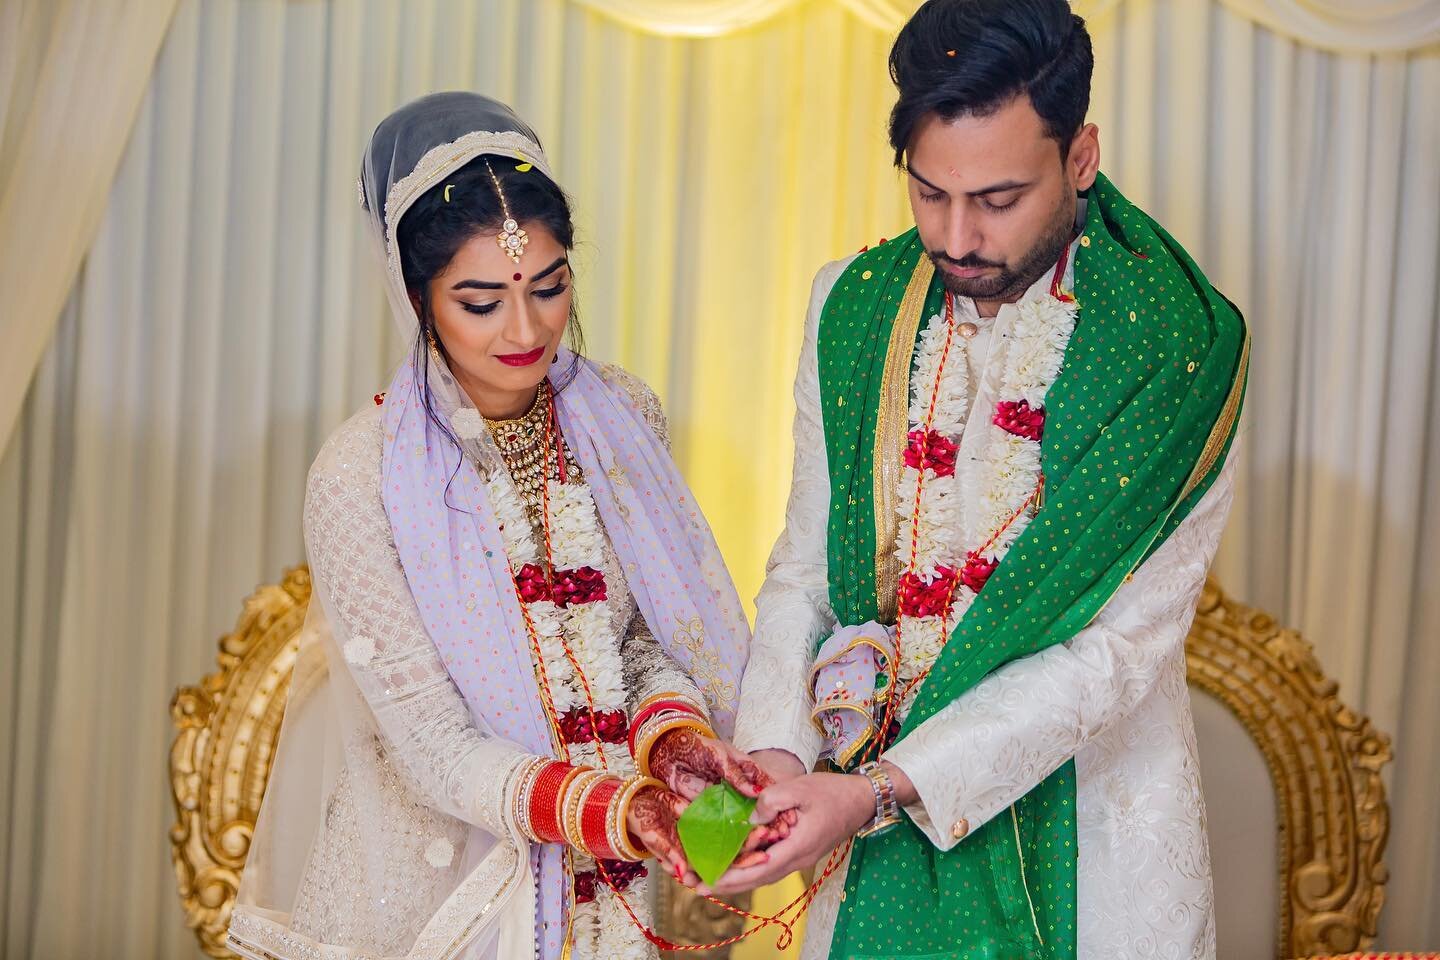 &ldquo;Being deeply loved by someone gives you strength, while loving someone deeply gives you courage&rdquo;

Mandap weddings are so nice to do, showcasing our exquisite couple Charanjit &amp; Raj on their wedding day. 

Couple: Charanjit &amp; Raj 